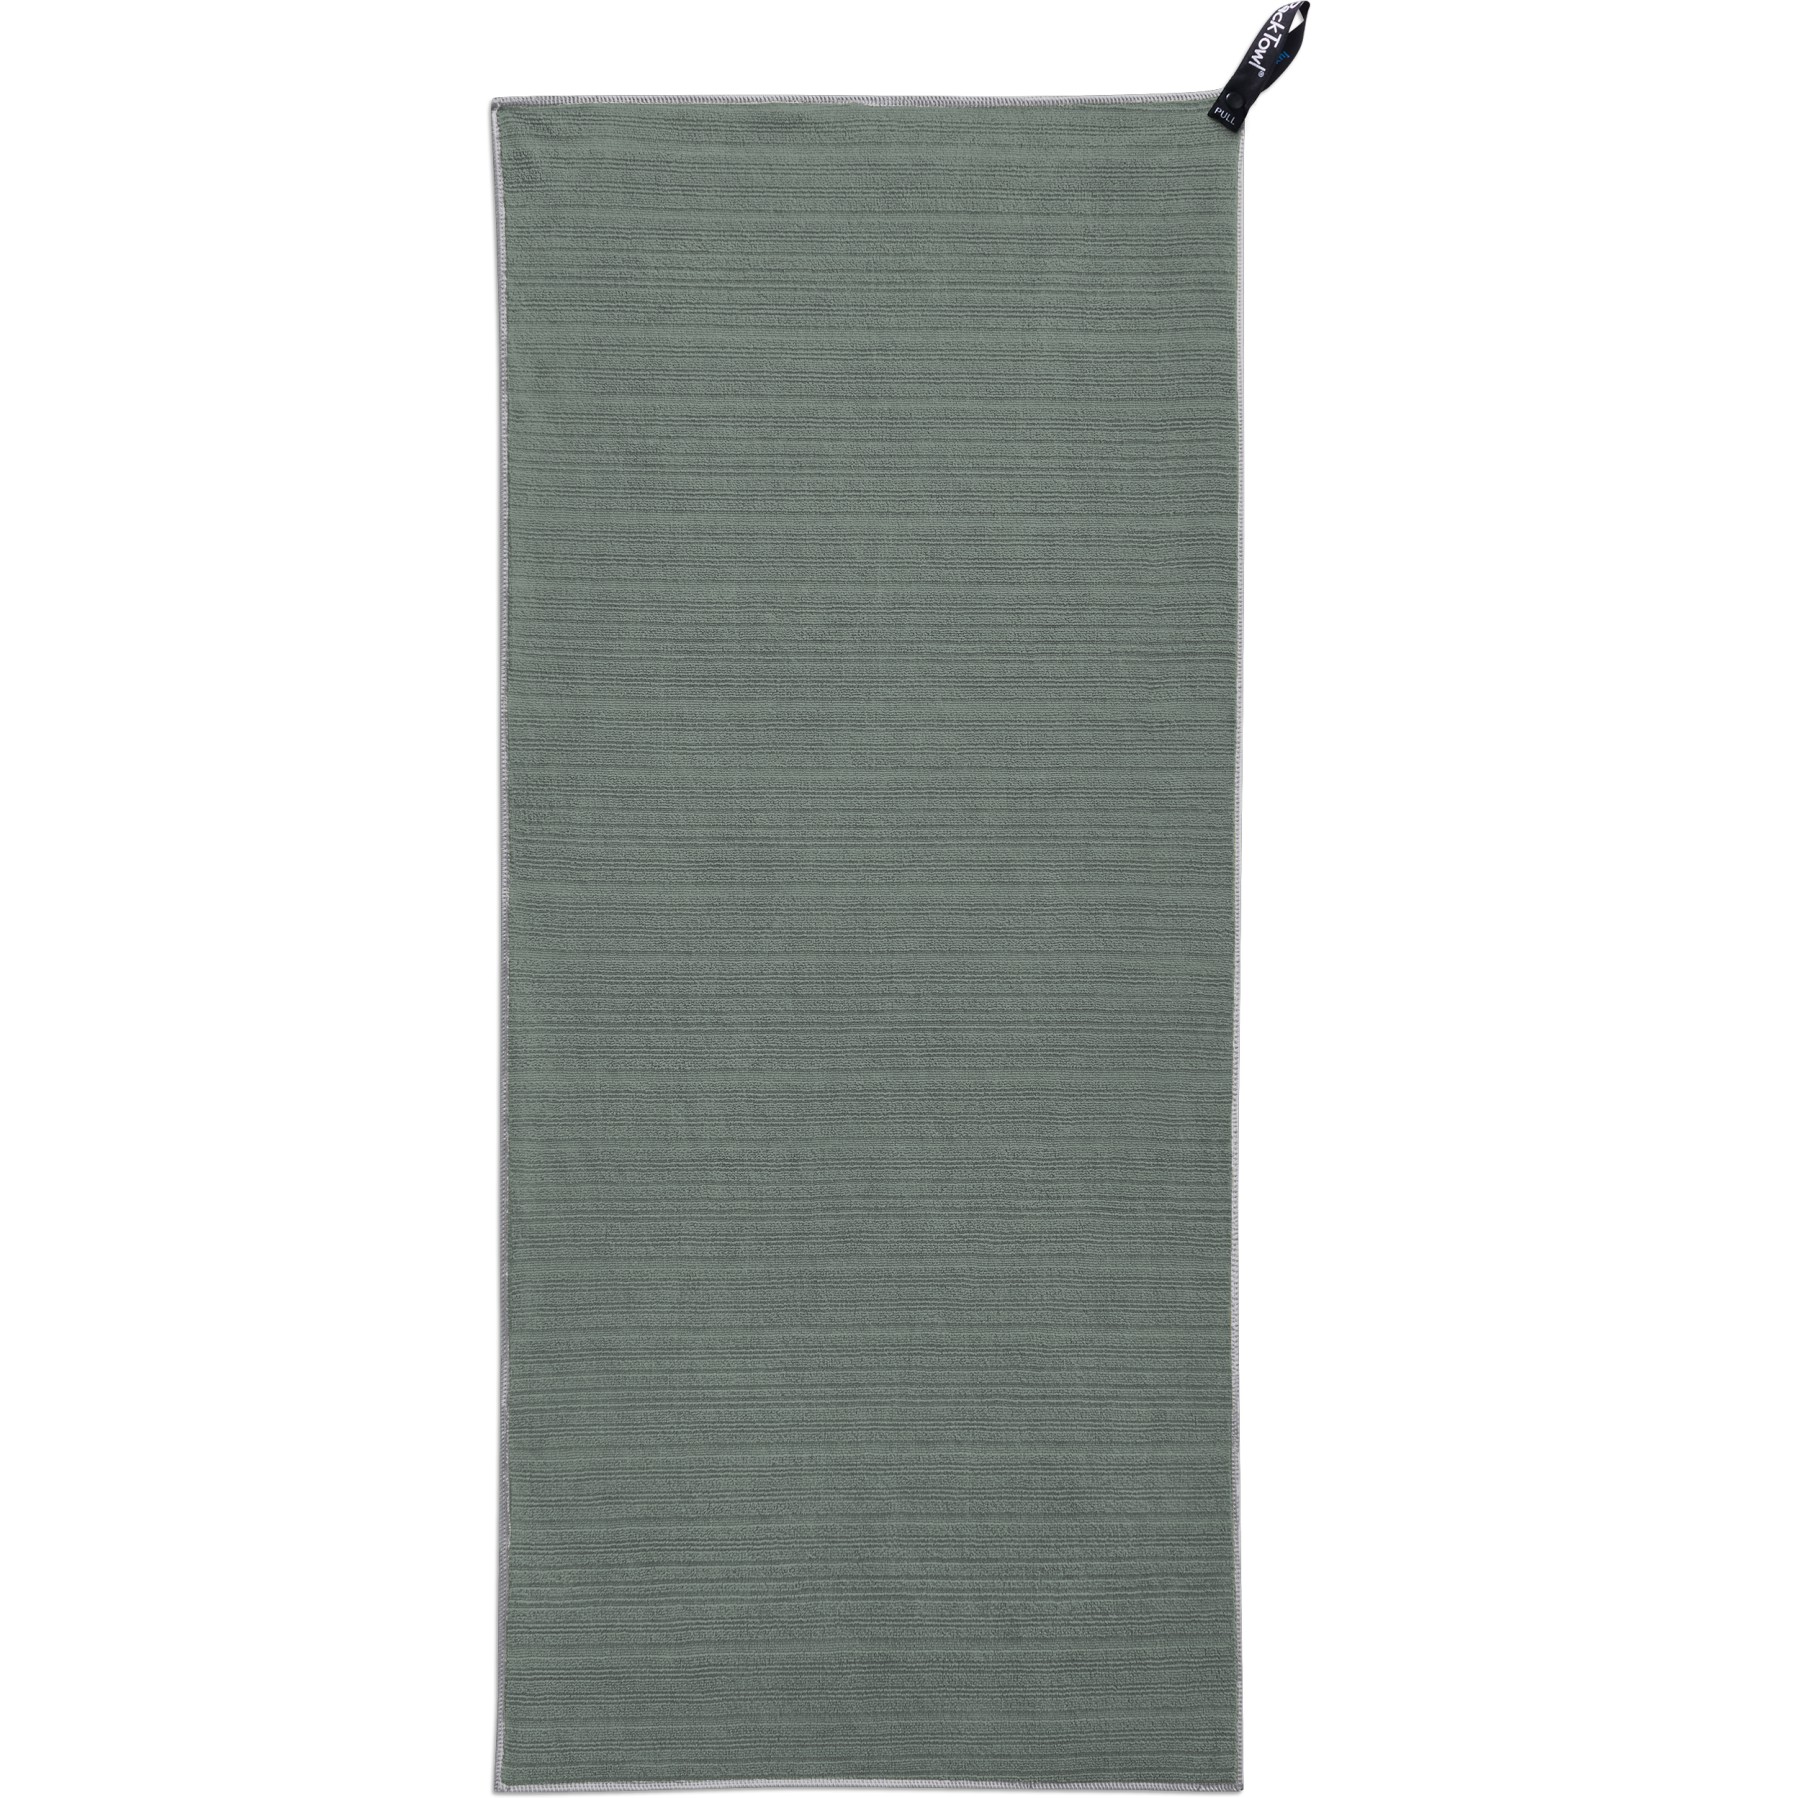 Picture of PackTowl Luxe Beach Towel - sage